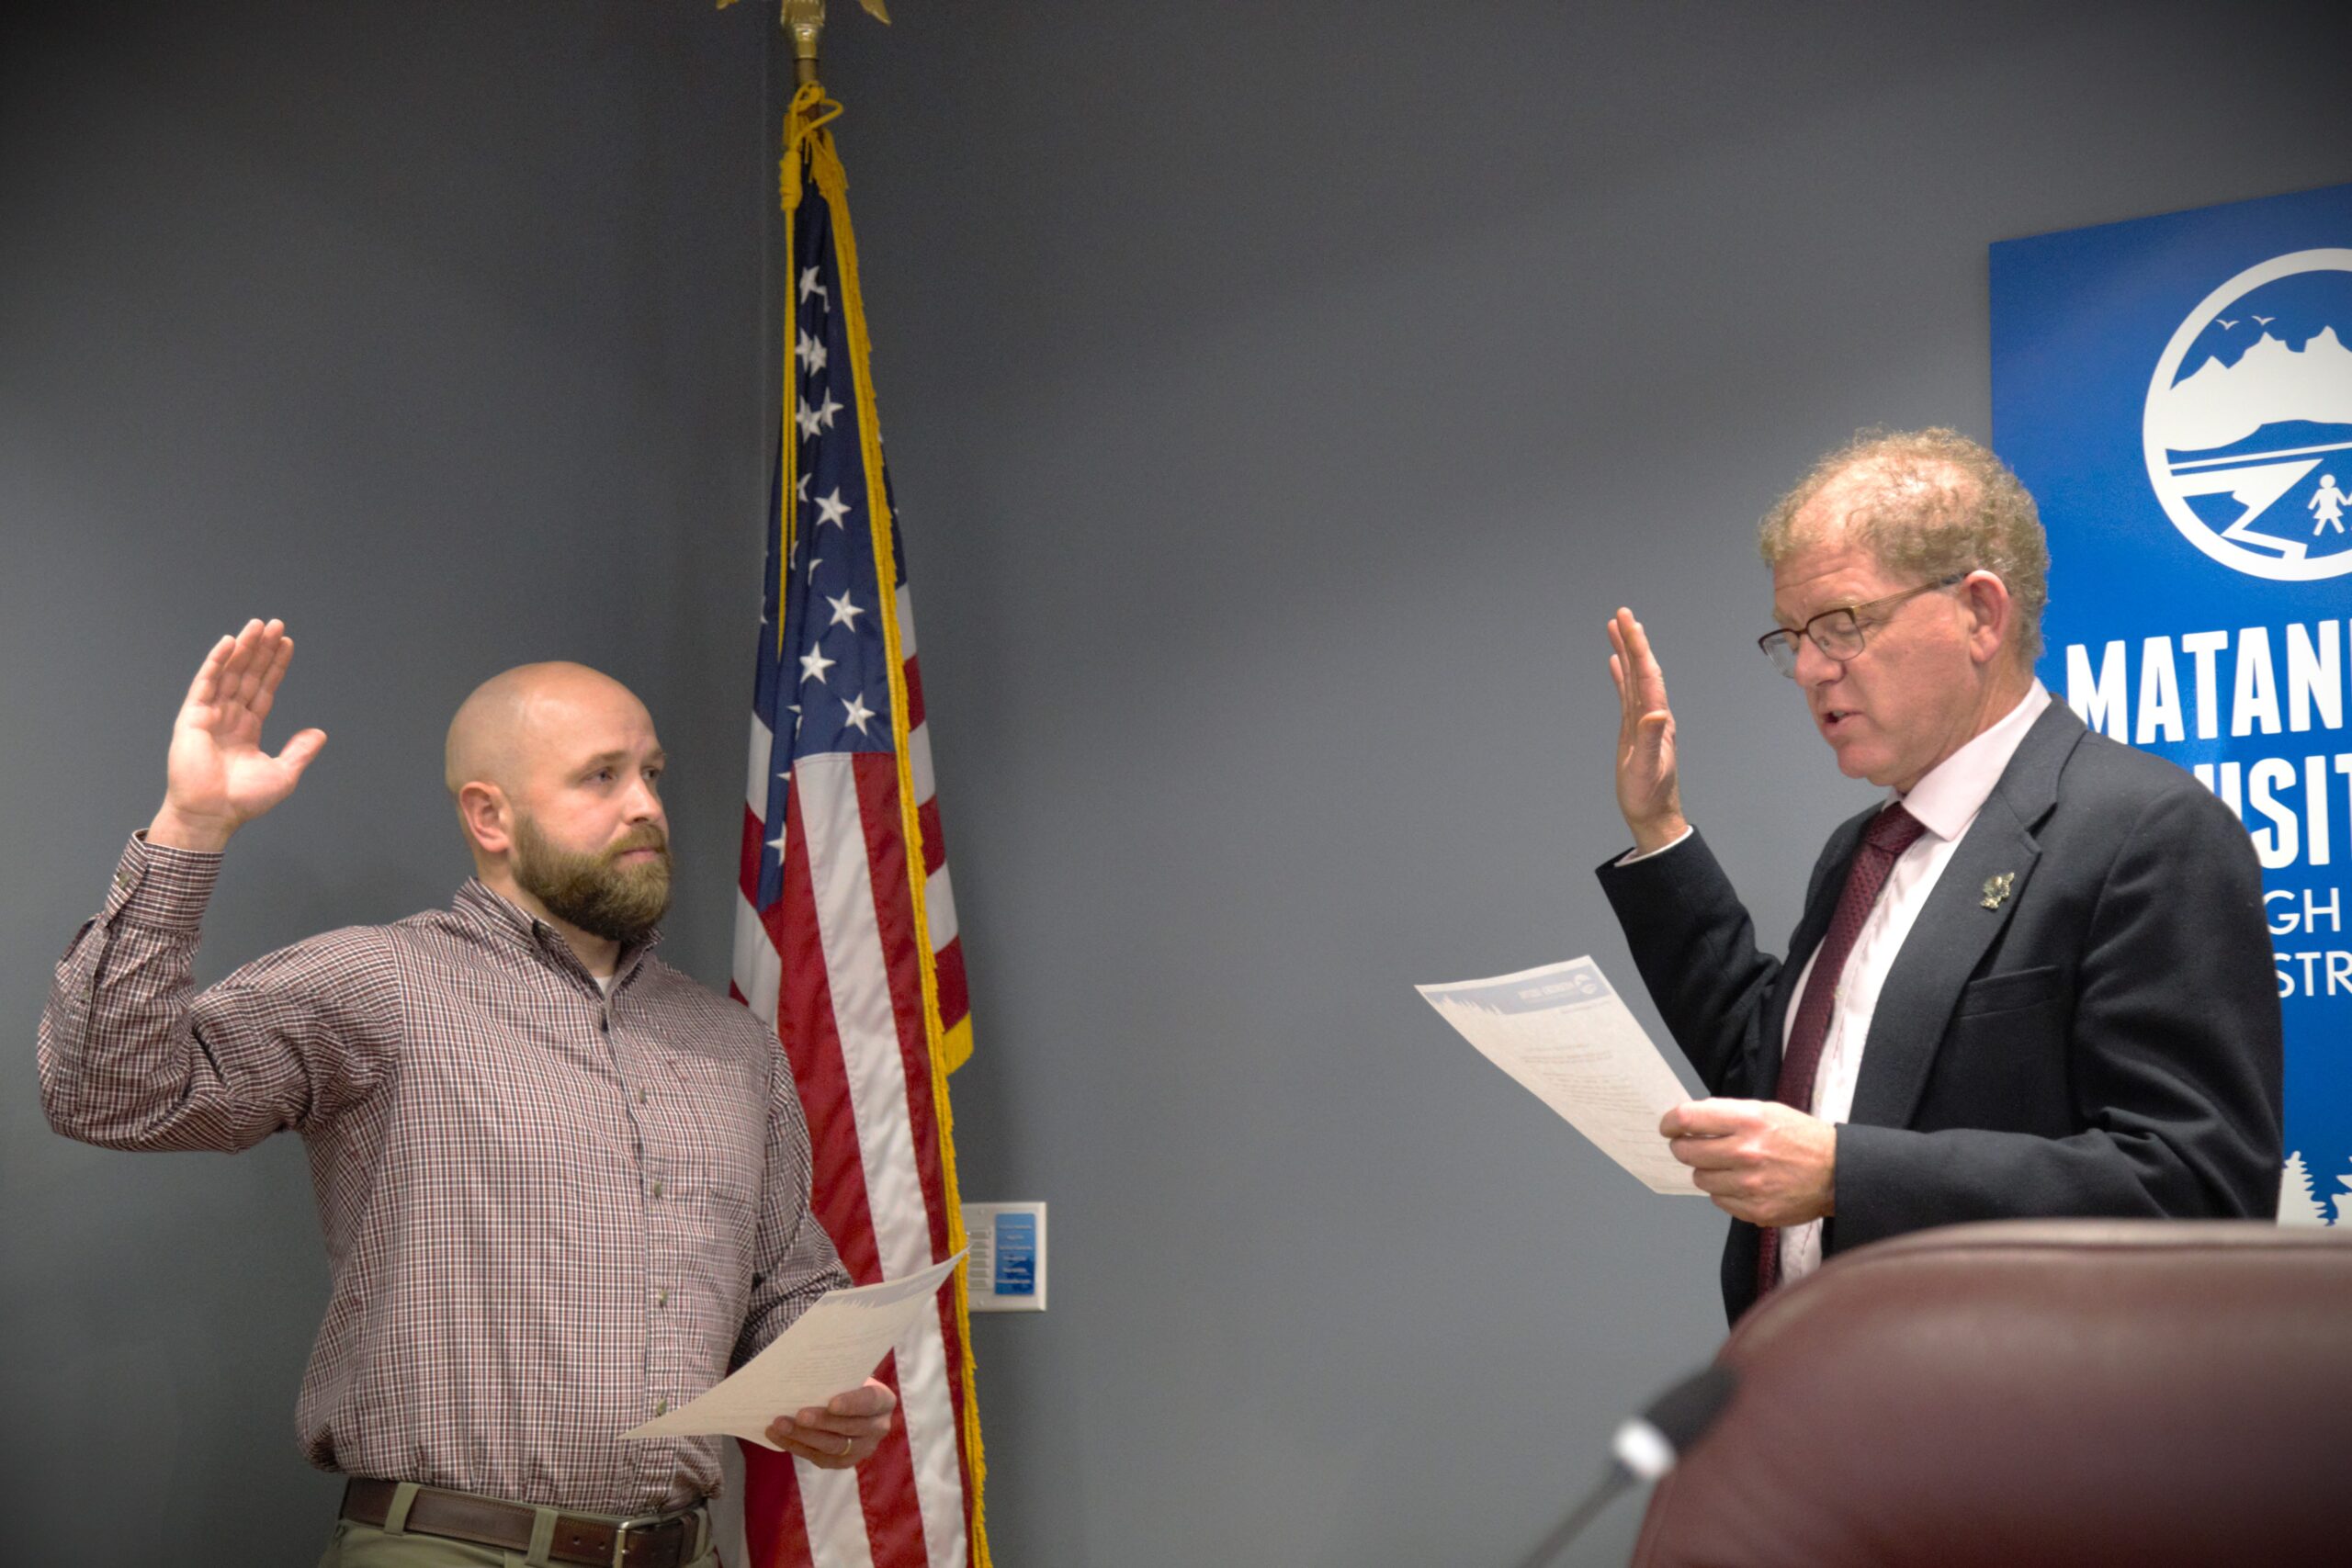 A man takes his oath of office in front of an American flag in the Mat-Su Borough School Board chambers.